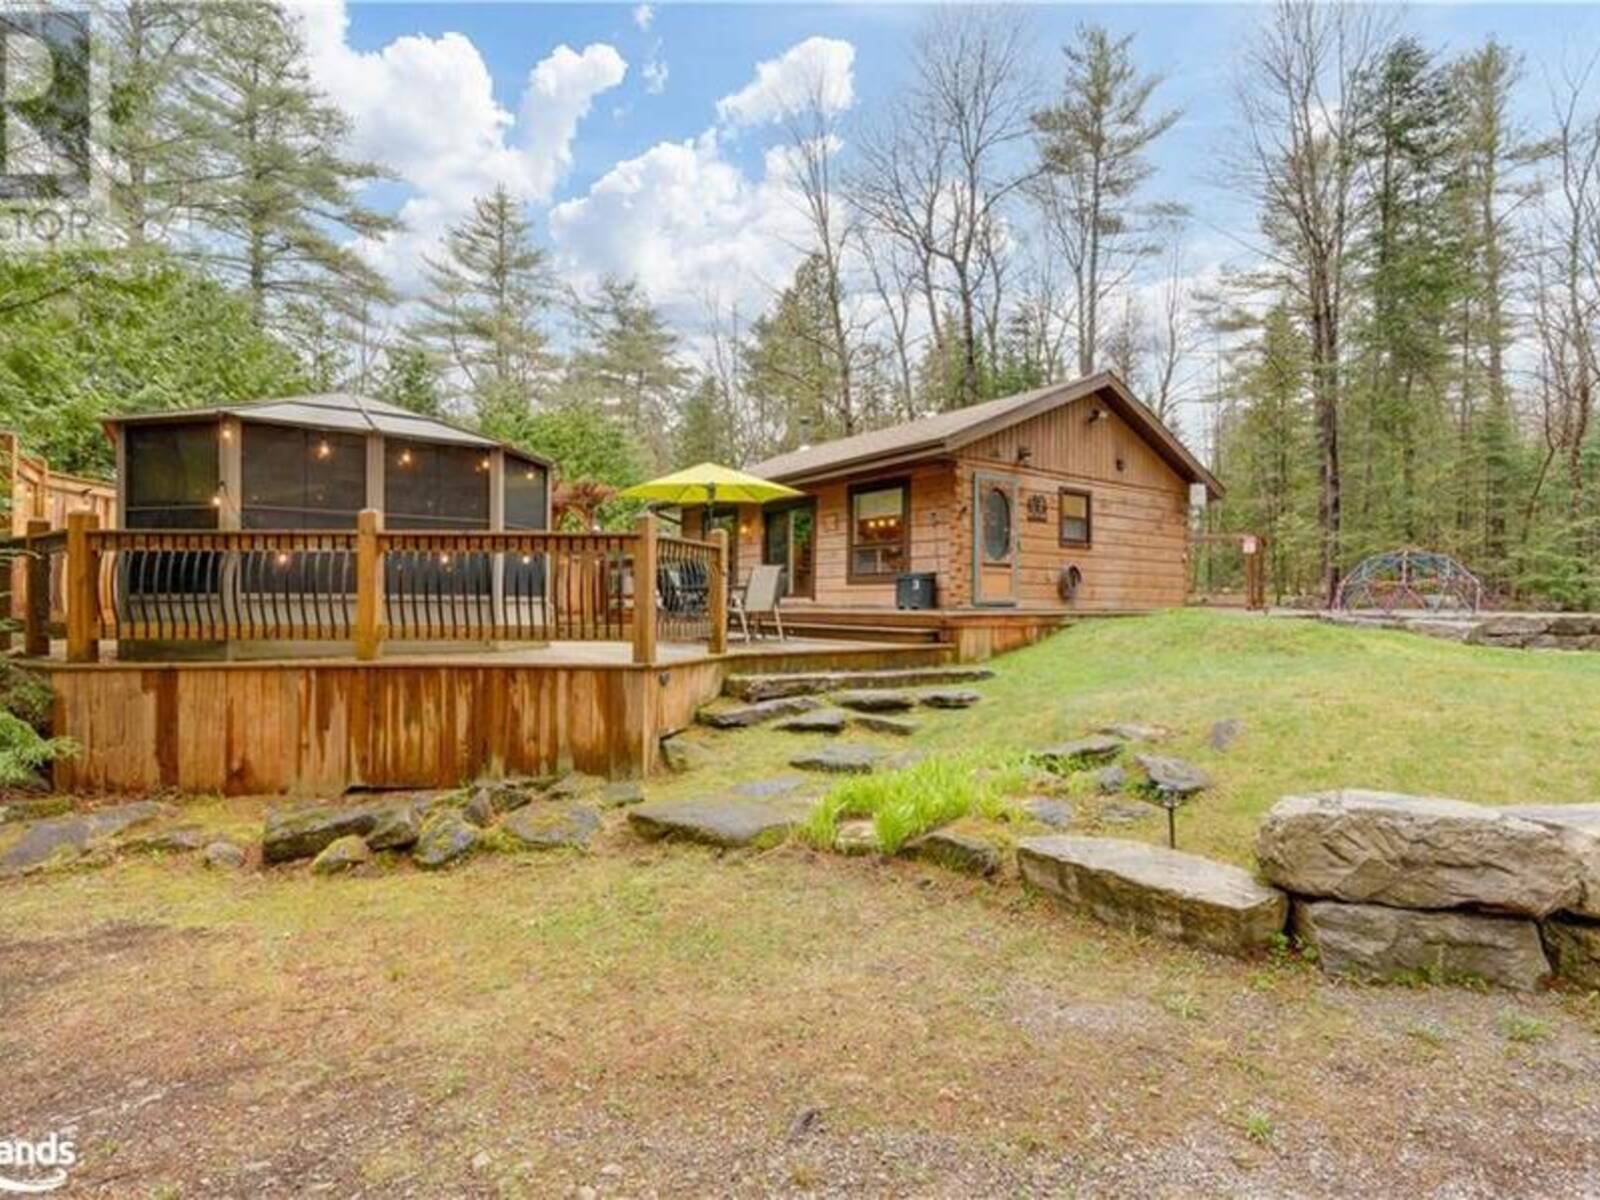 24 EAST CLEAR BAY Road, Kinmount, Ontario K0M 2A0